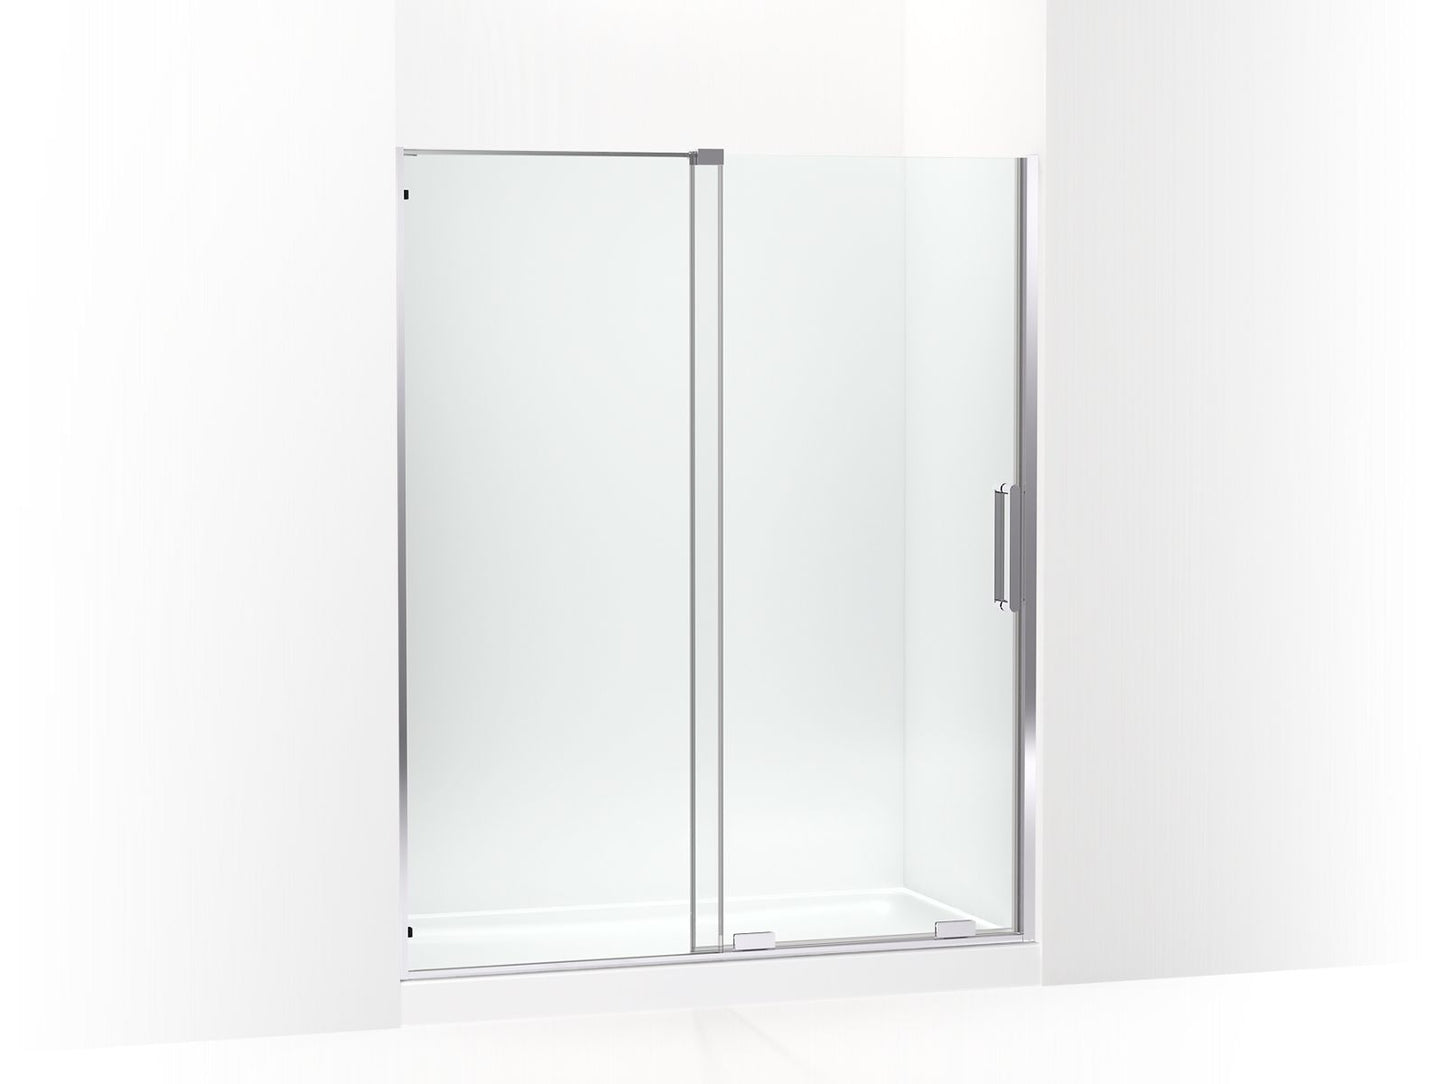 KOHLER K-707621-8L-SHP Echelon Sliding Shower Door, 71-3/4" H X 55-3/4 - 59-3/4" W, With 5/16" Thick Crystal Clear Glass In Bright Polished Silver